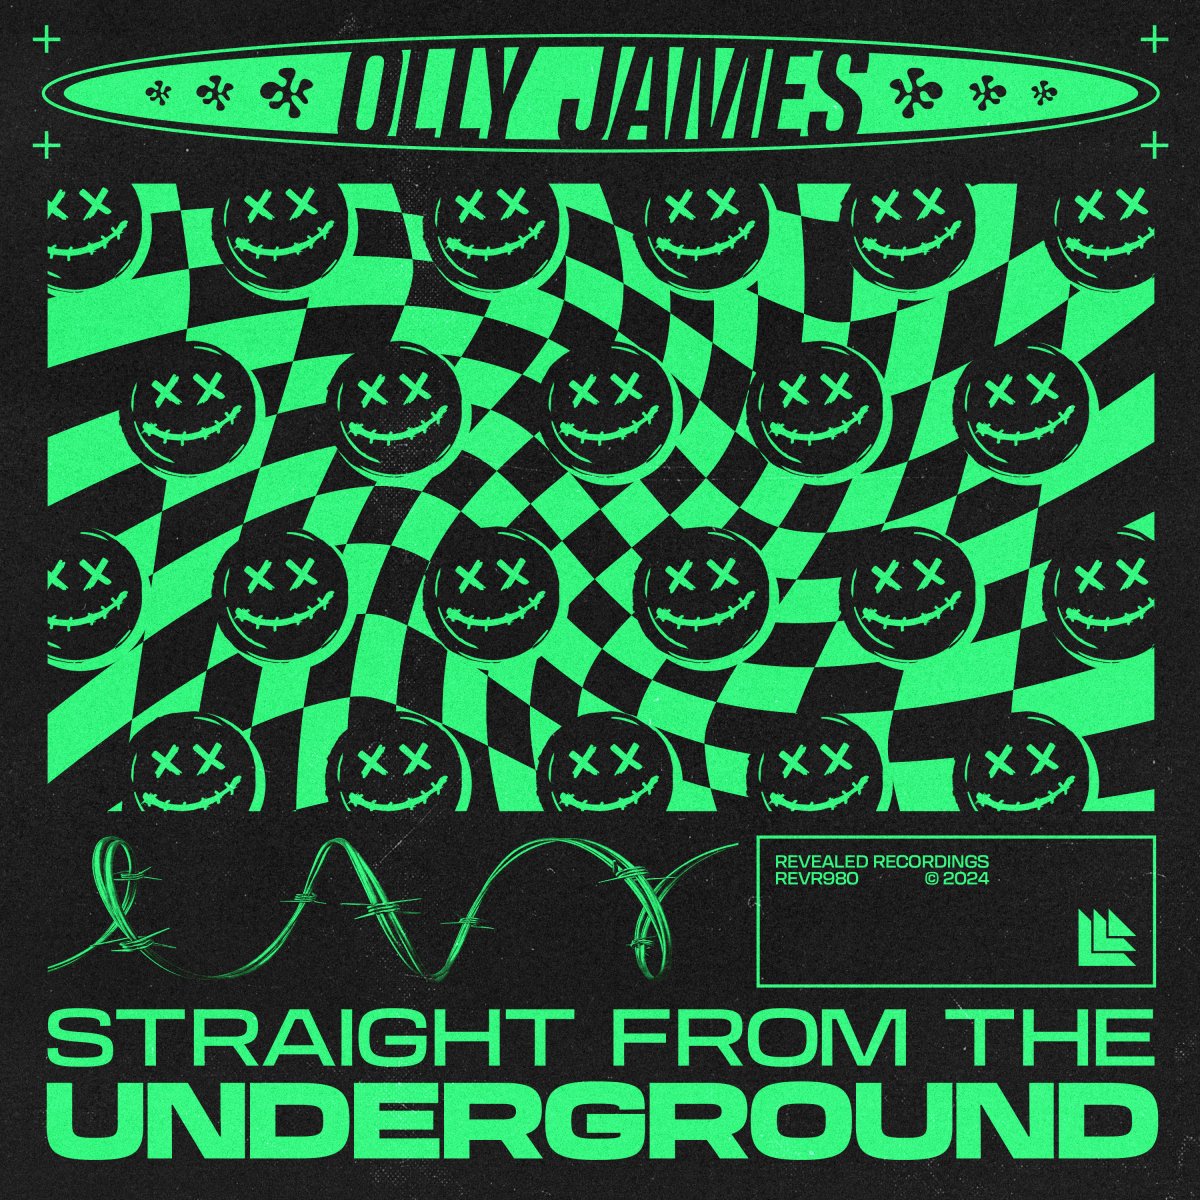 Straight From The Underground - Olly James⁠ 